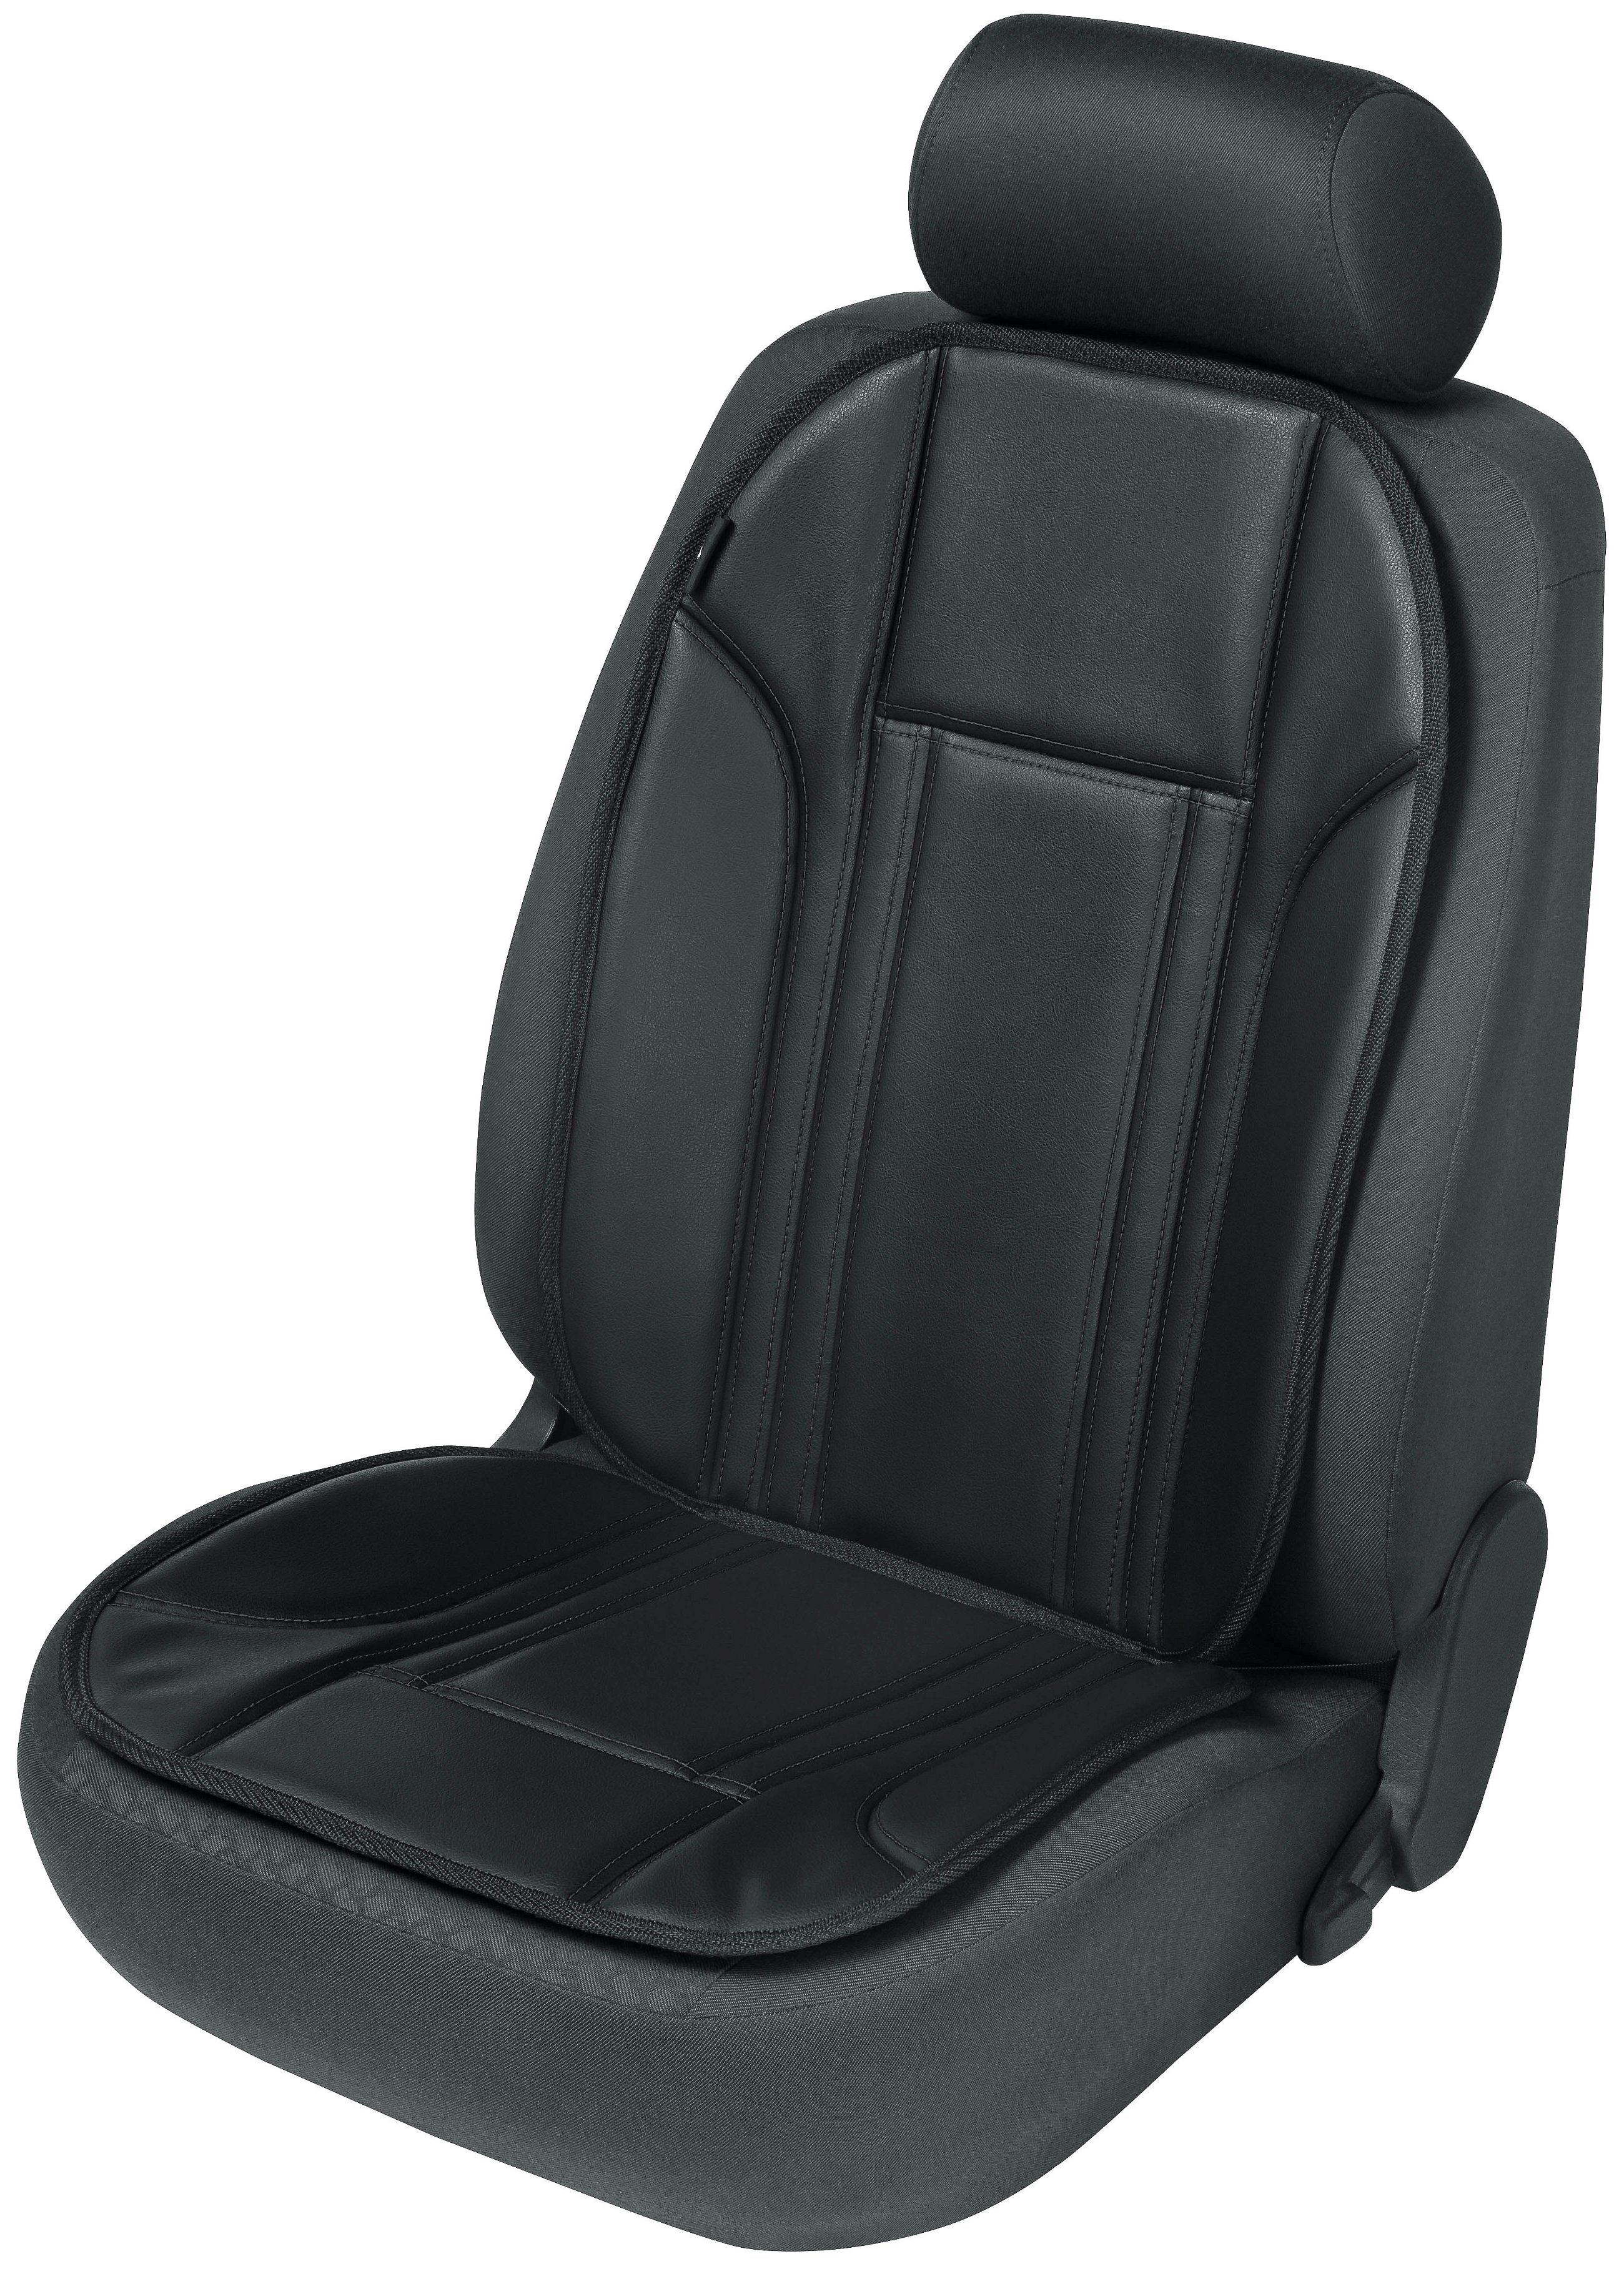 Car Seat cover in imitation leather Ravenna black